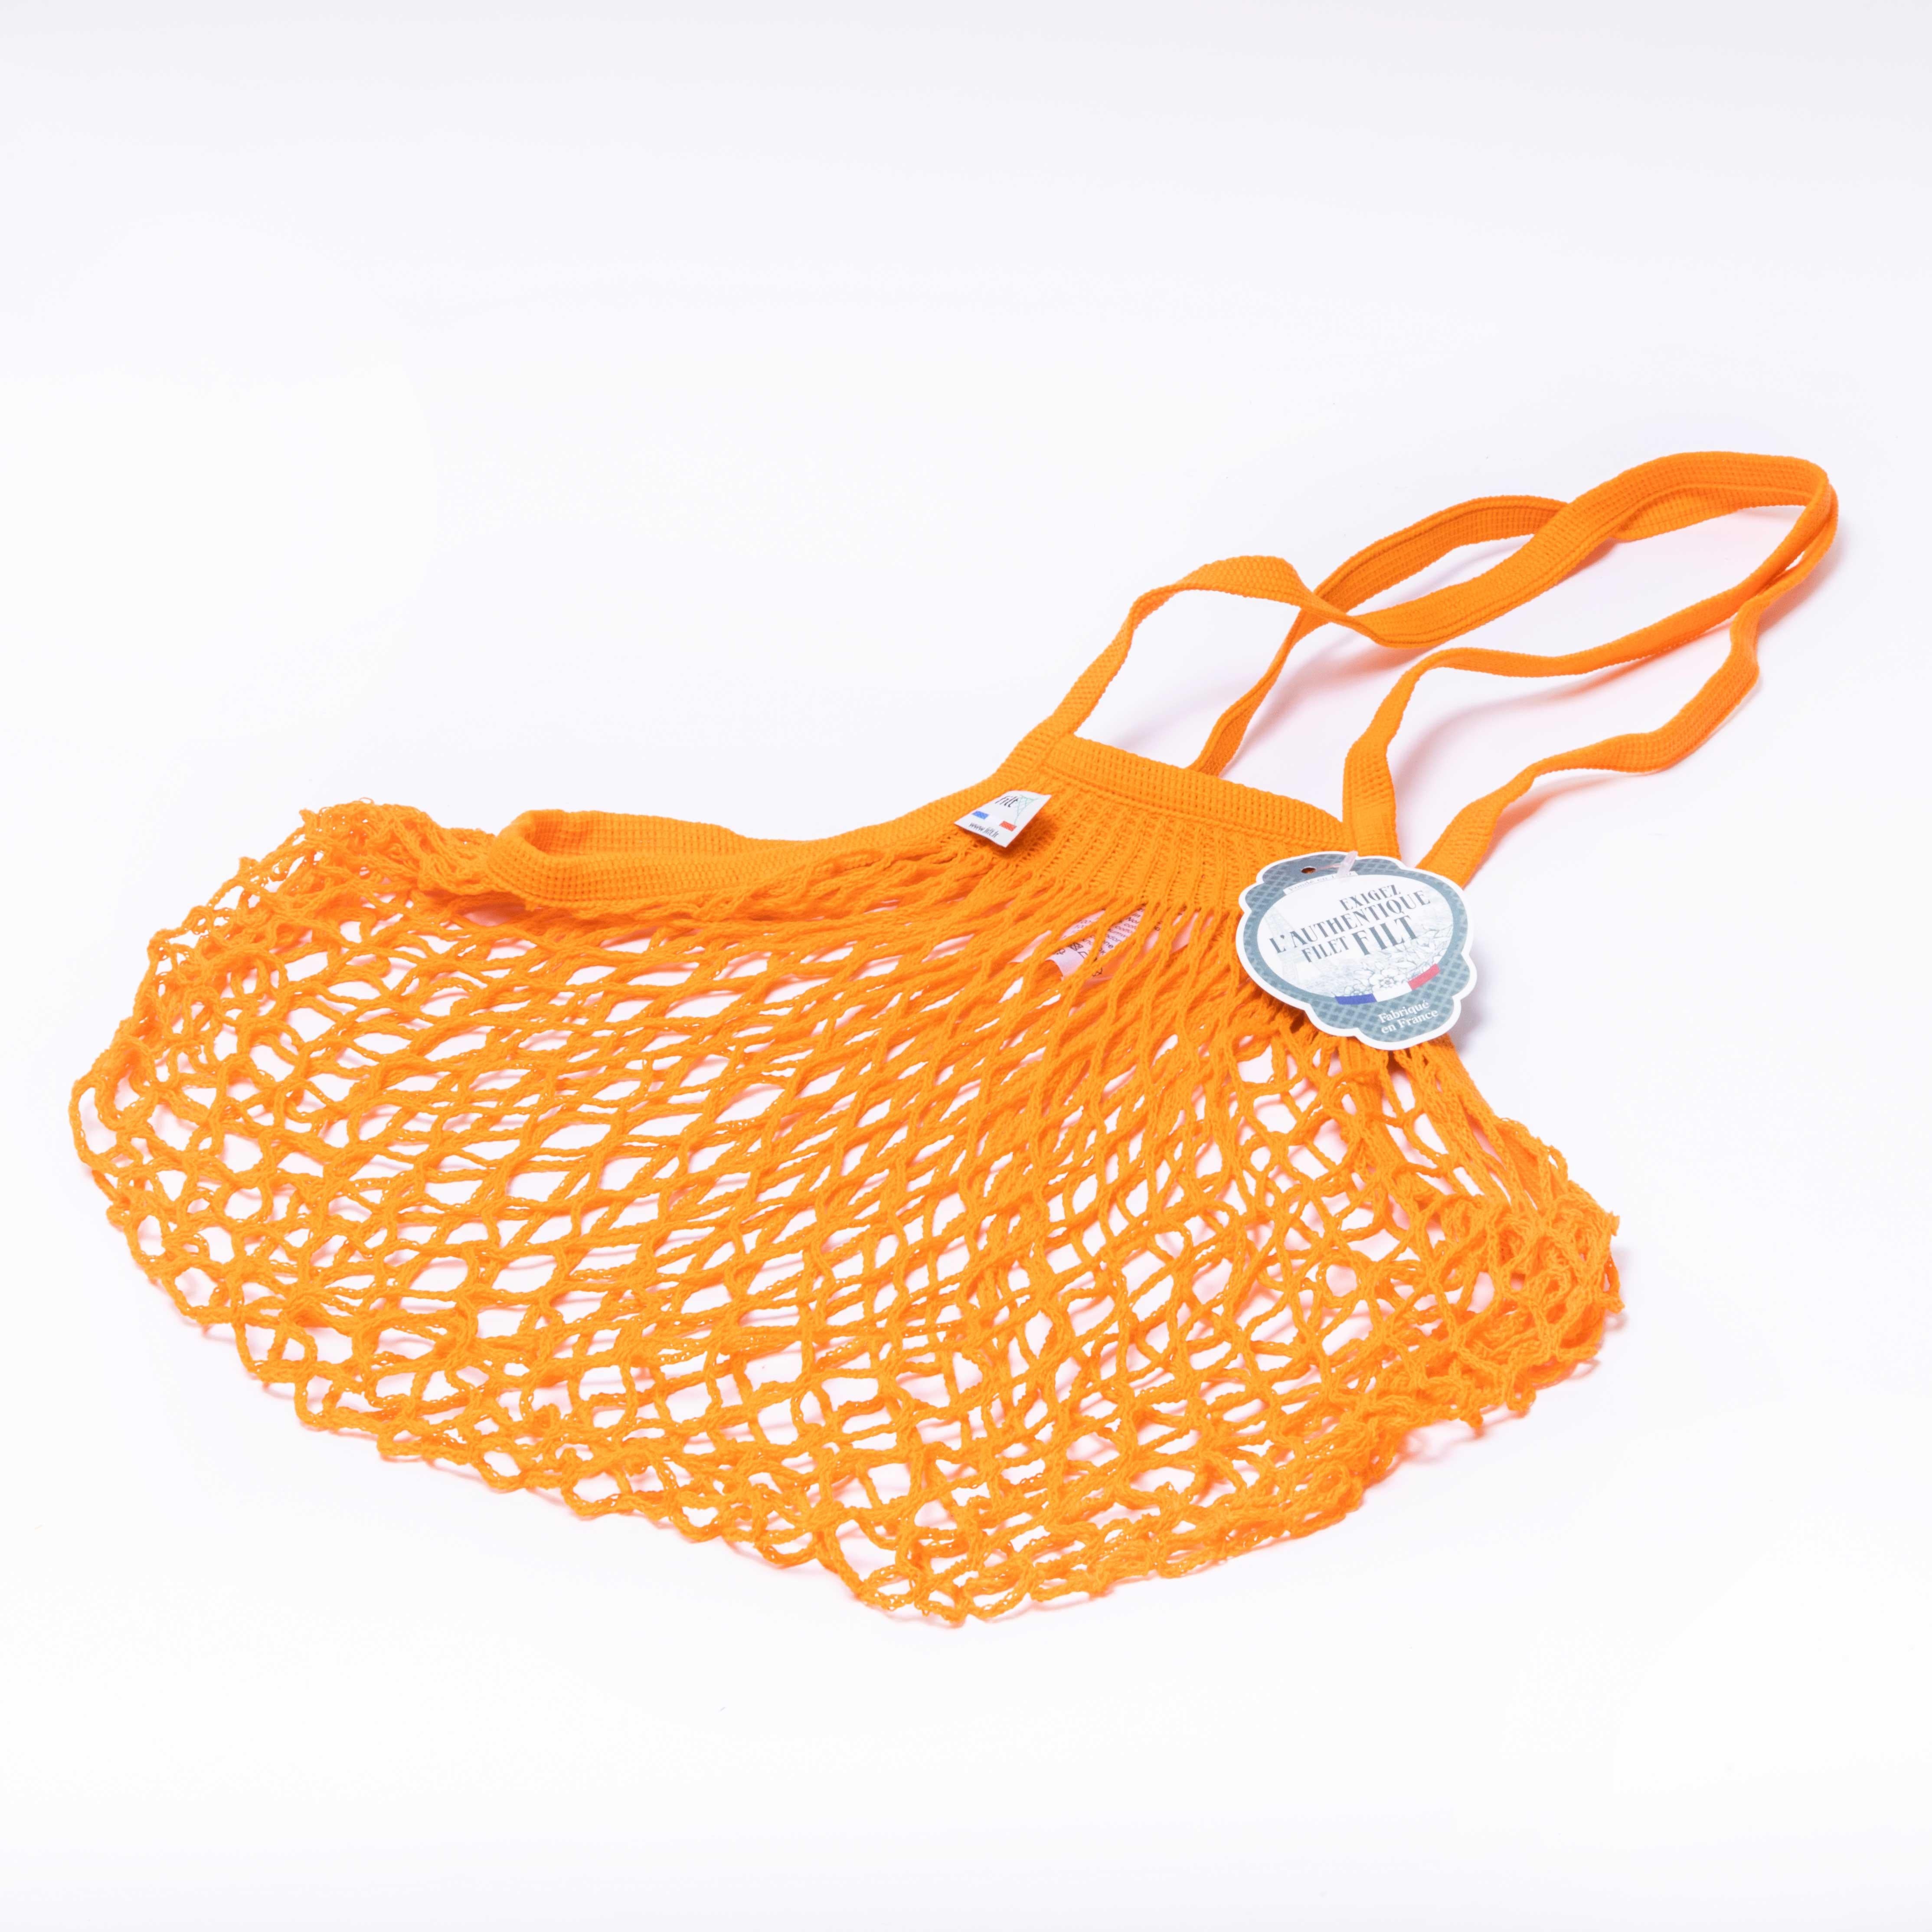 Filt – orange net cotton carry bag
Filt – orange net cotton carry bag. The original and surviving producer of net bags. Filt have produced net bags in Normandy since 1860. The typical bags used by generations of busy households for market and